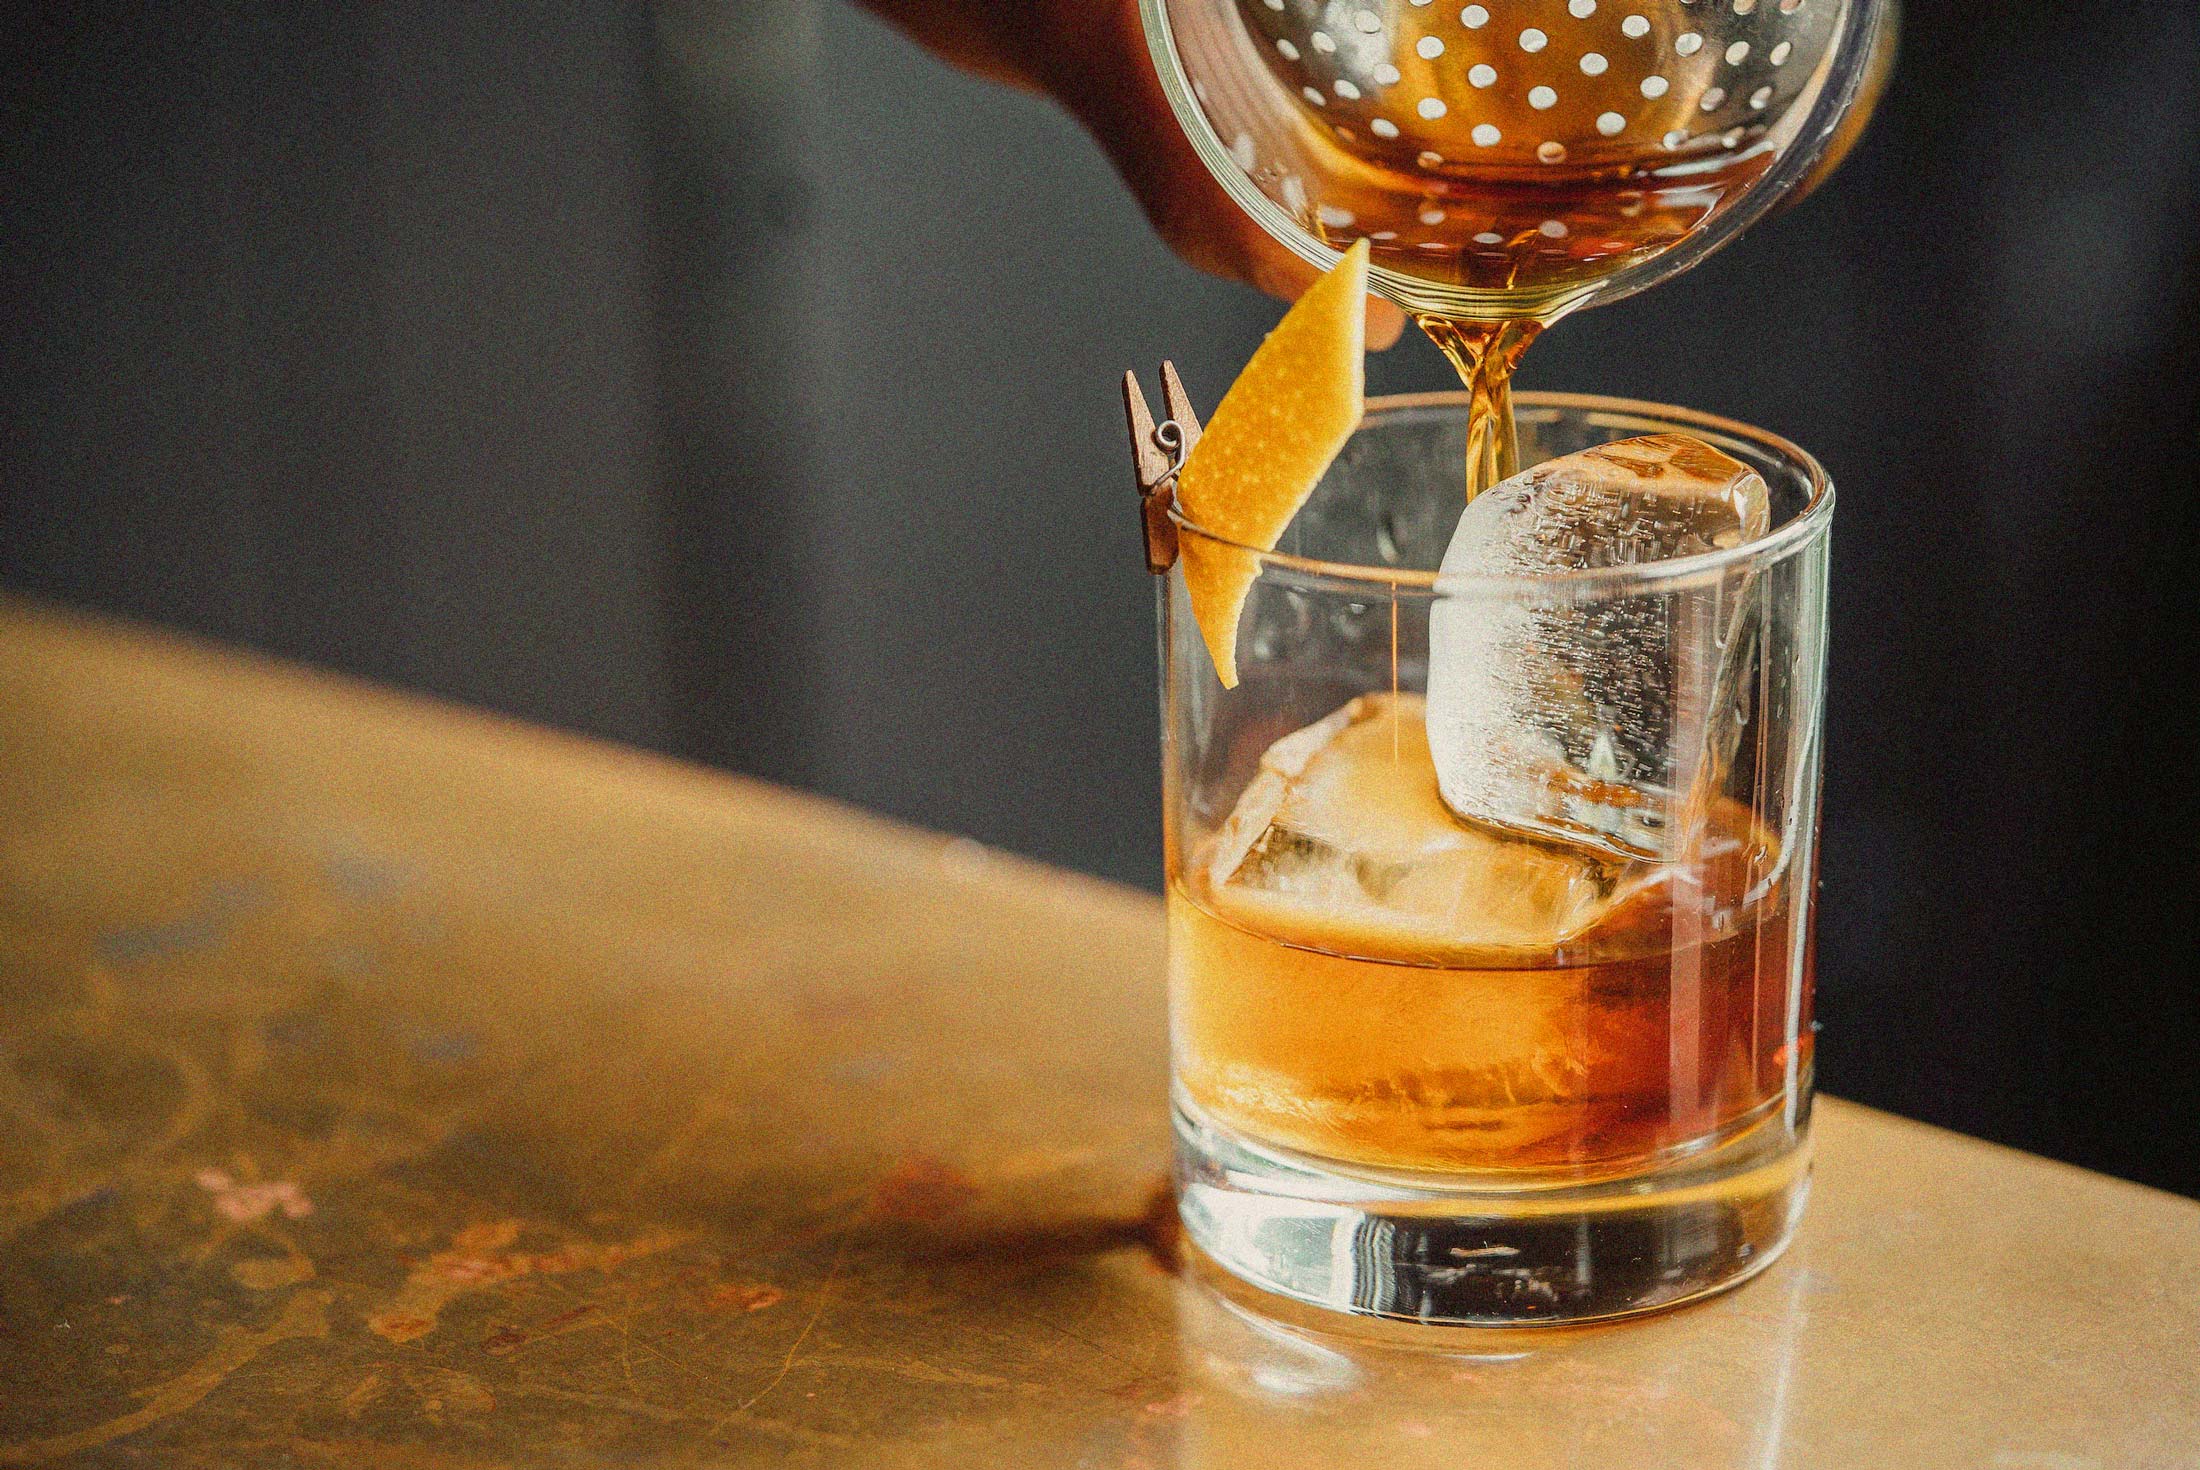 Whiskey Lovers, Here's Why You Should Be Drinking Cognac Instead